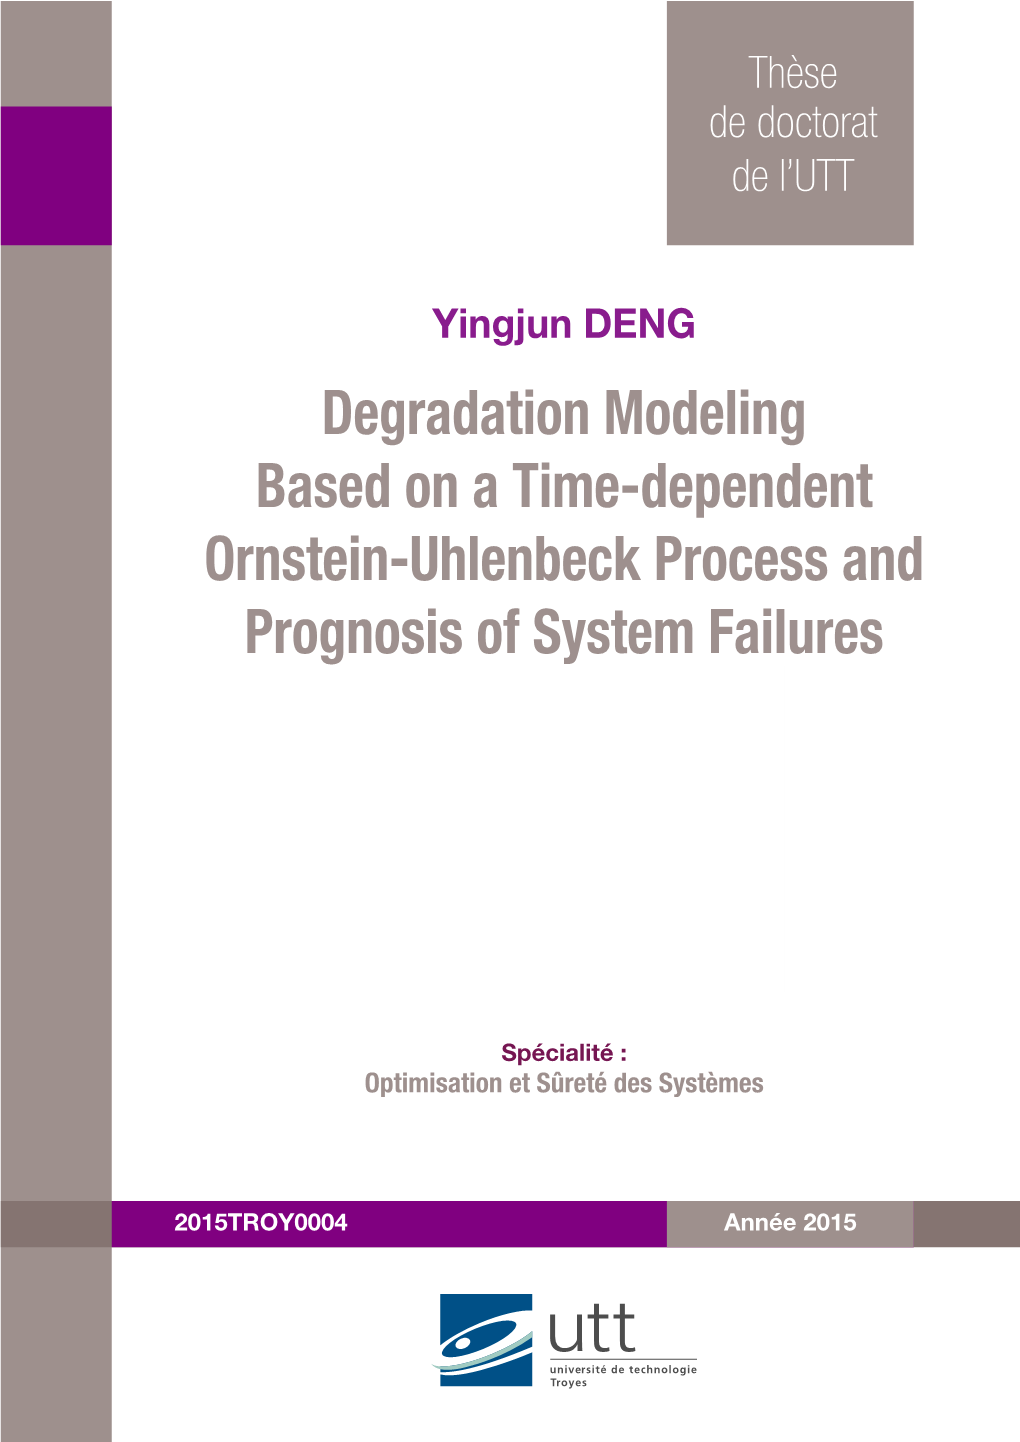 Degradation Modeling Based on a Time-Dependent Ornstein-Uhlenbeck Process and Prognosis of System Failures